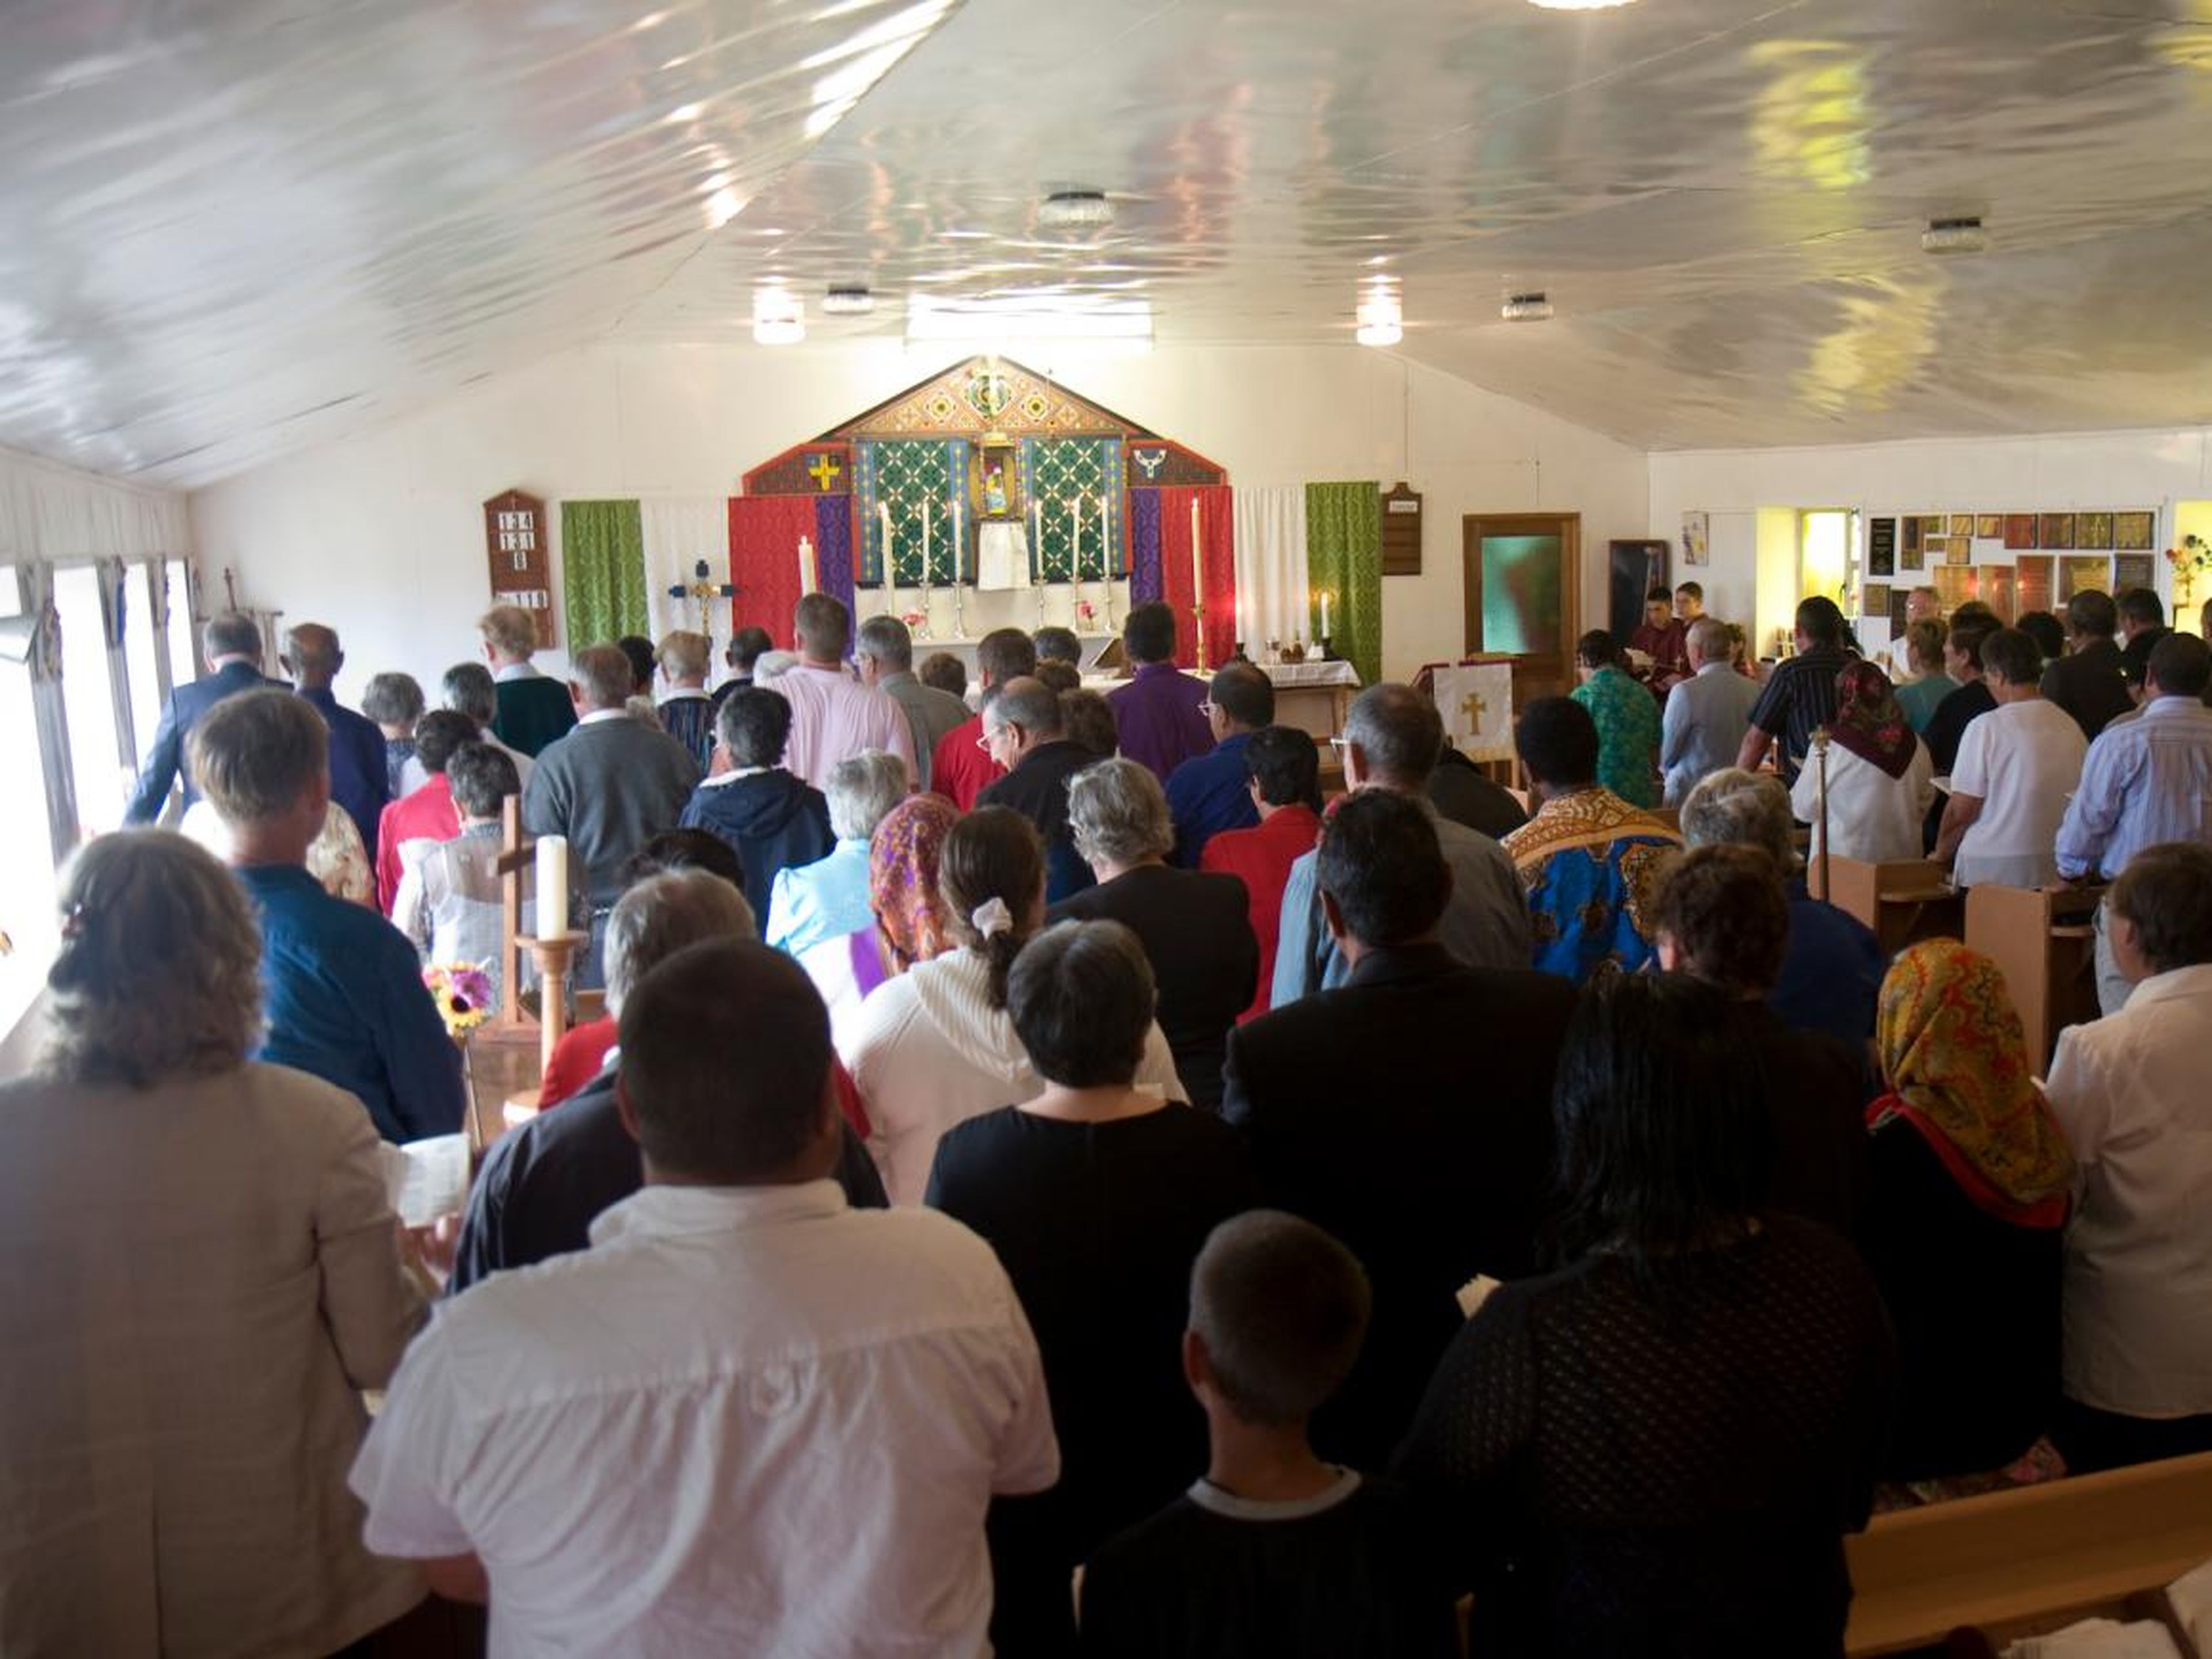 As well as traditional Catholic holidays. Pictured below are residents at Saint Mary's Anglican Church on Easter Sunday.